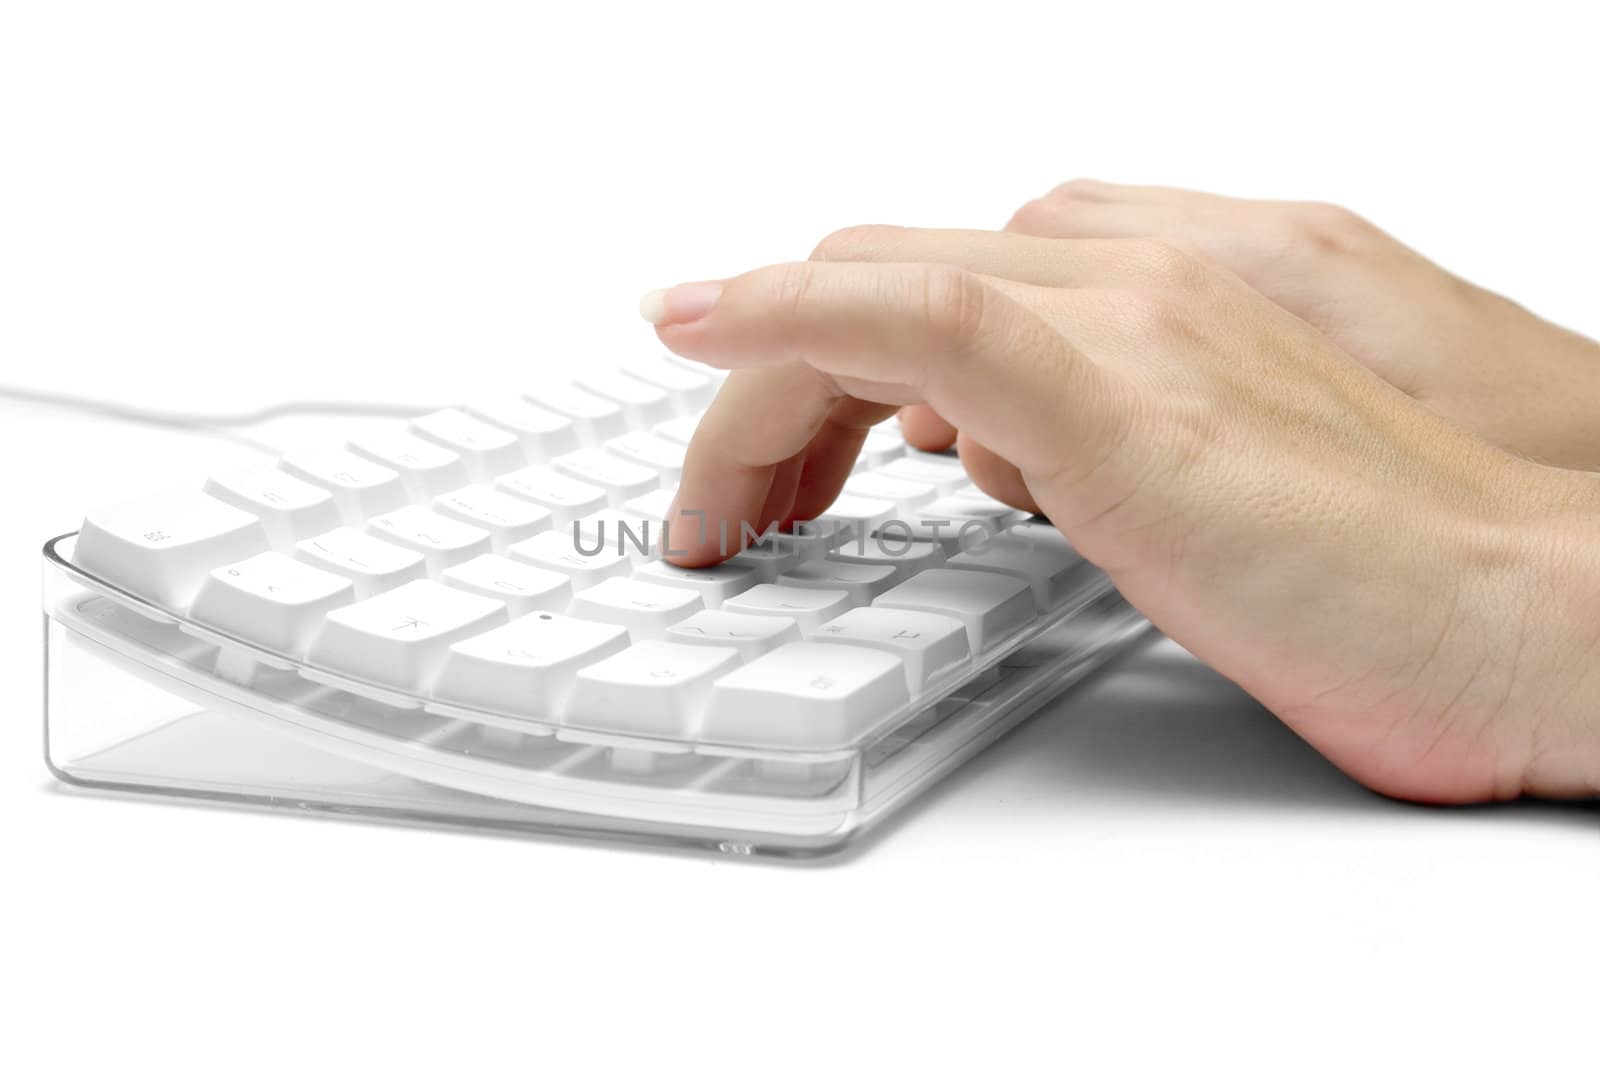 Female hands typing on a white computer keyboard. Isolated on a white background.